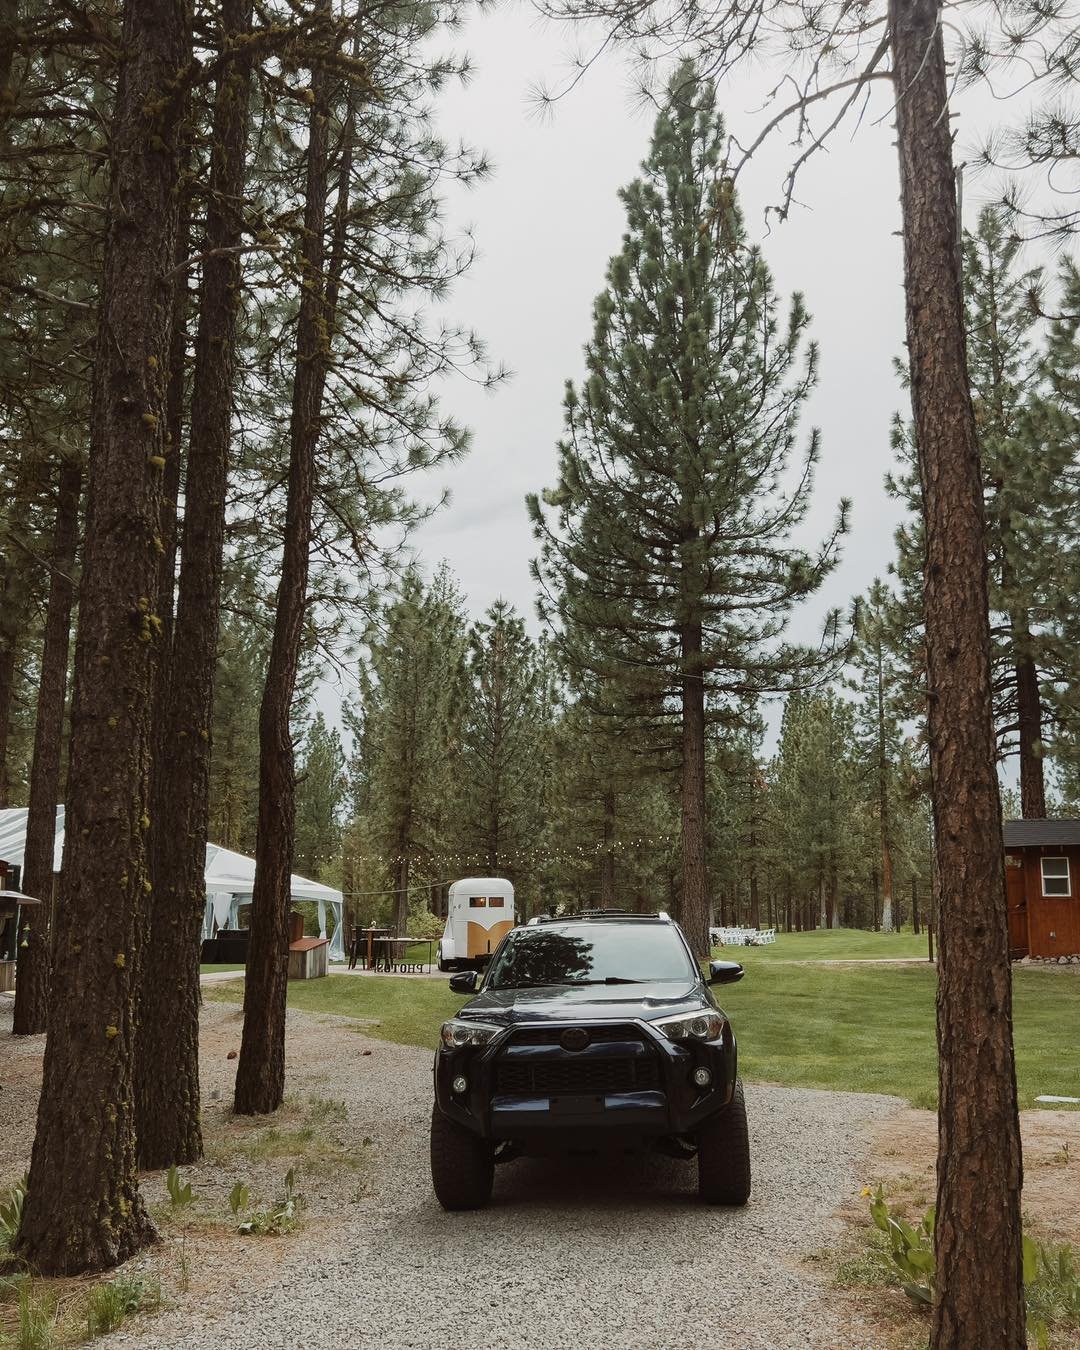 Not much clearance is needed to park Juniper! 

#chaletviewlodgewedding #chaletviewlodge #chaletviewlodgeweddings #PhotoBoothProps #truckeephotobooth #PhotoBoothRental #photoboothrental #tahoephotobooth #laketahoephotobooth #portolaphotobooth